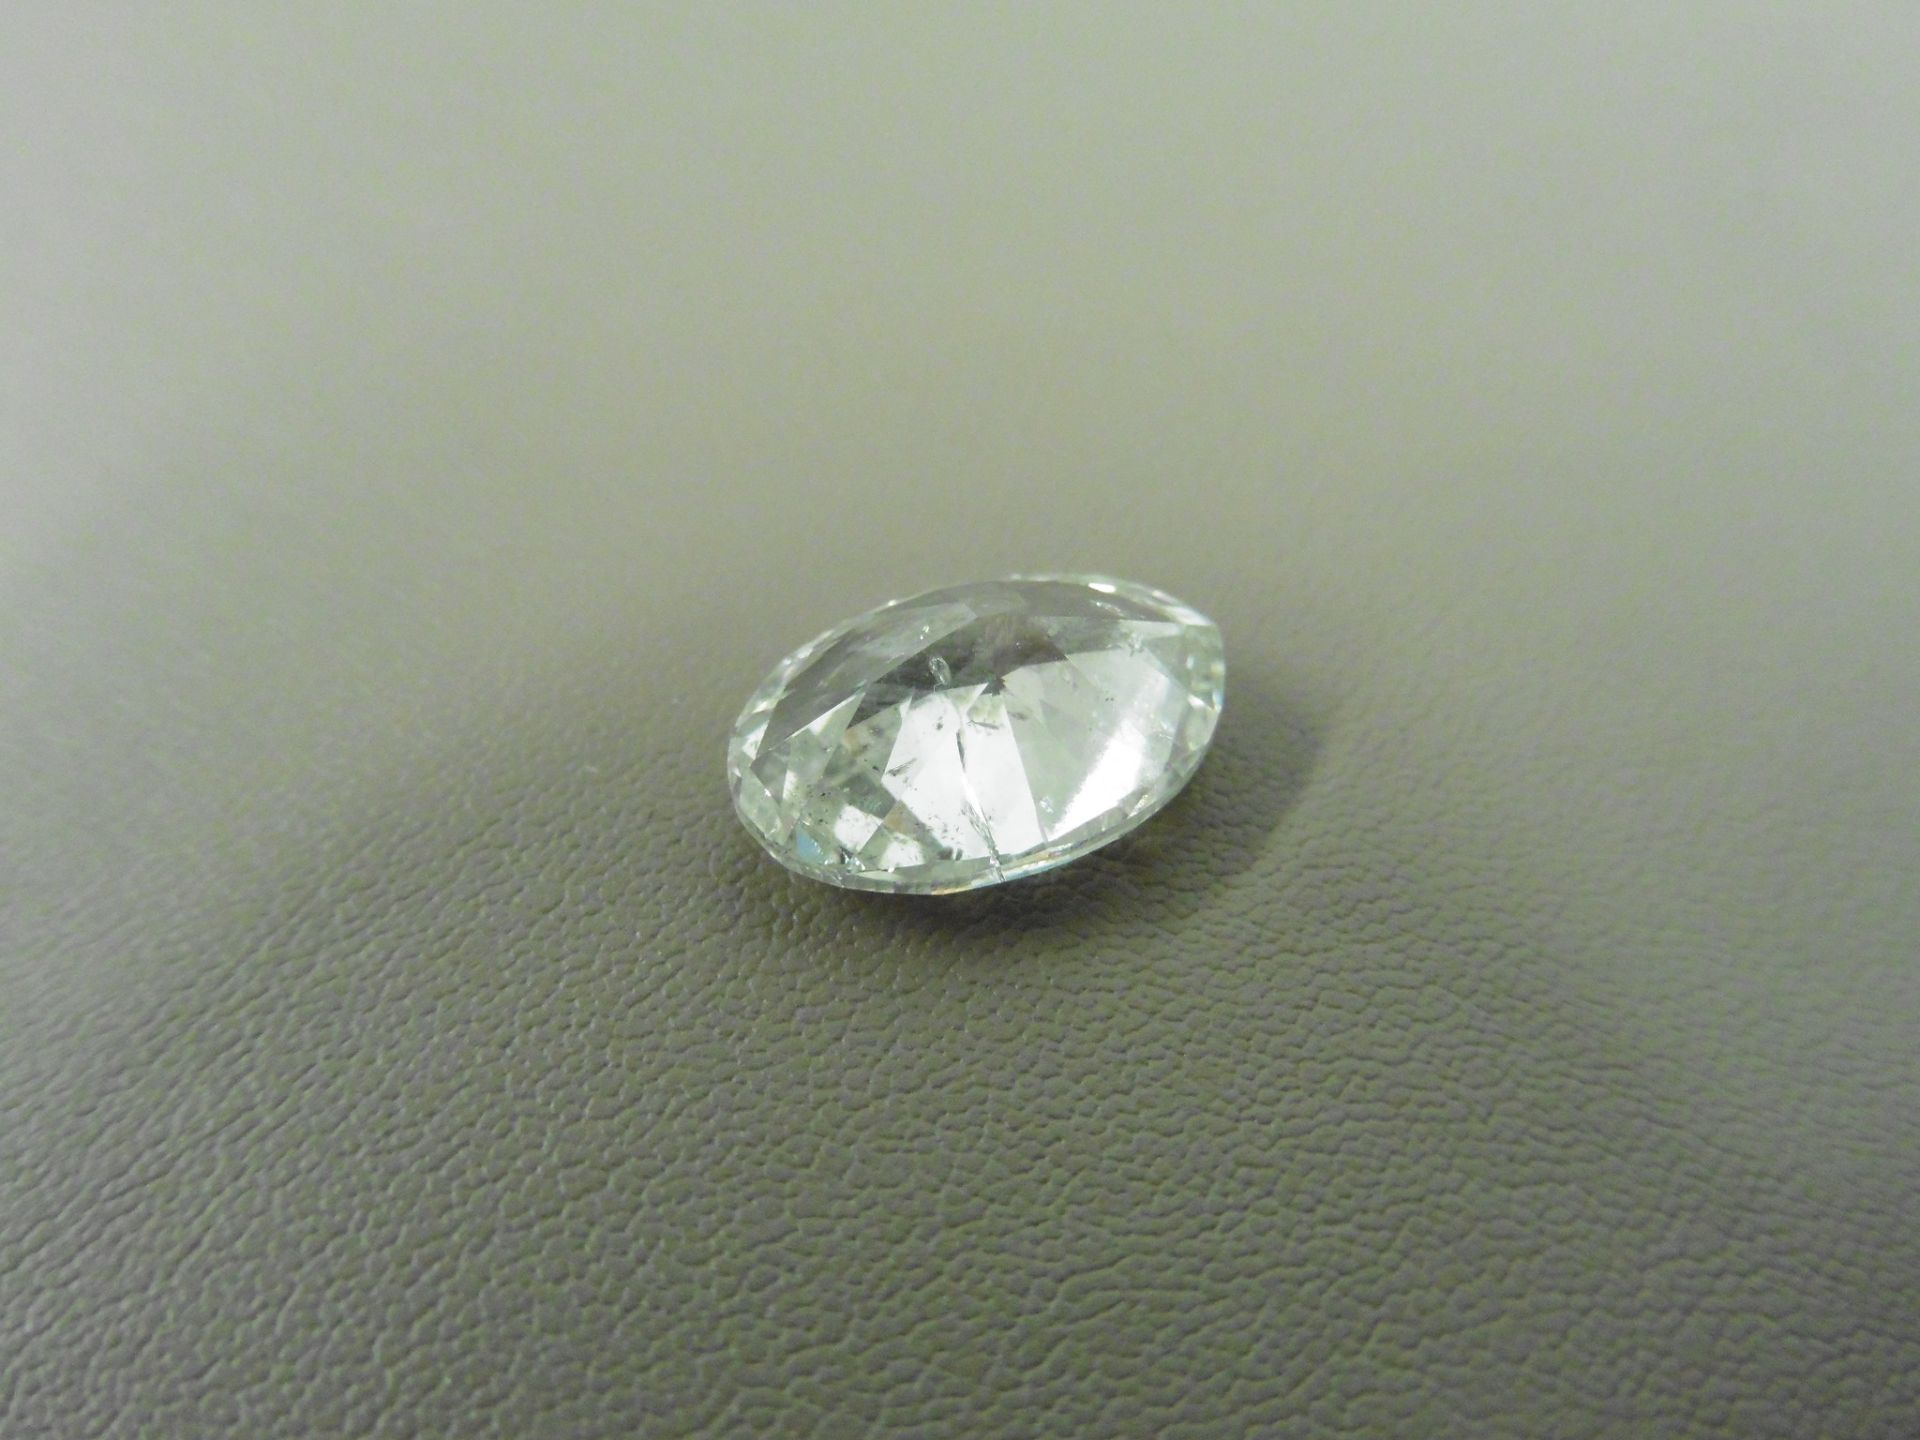 4.02ct natural loose oval cut diamond.H colour and Si3 clarity. EGL certificate. Valued at £65950 - Image 5 of 5